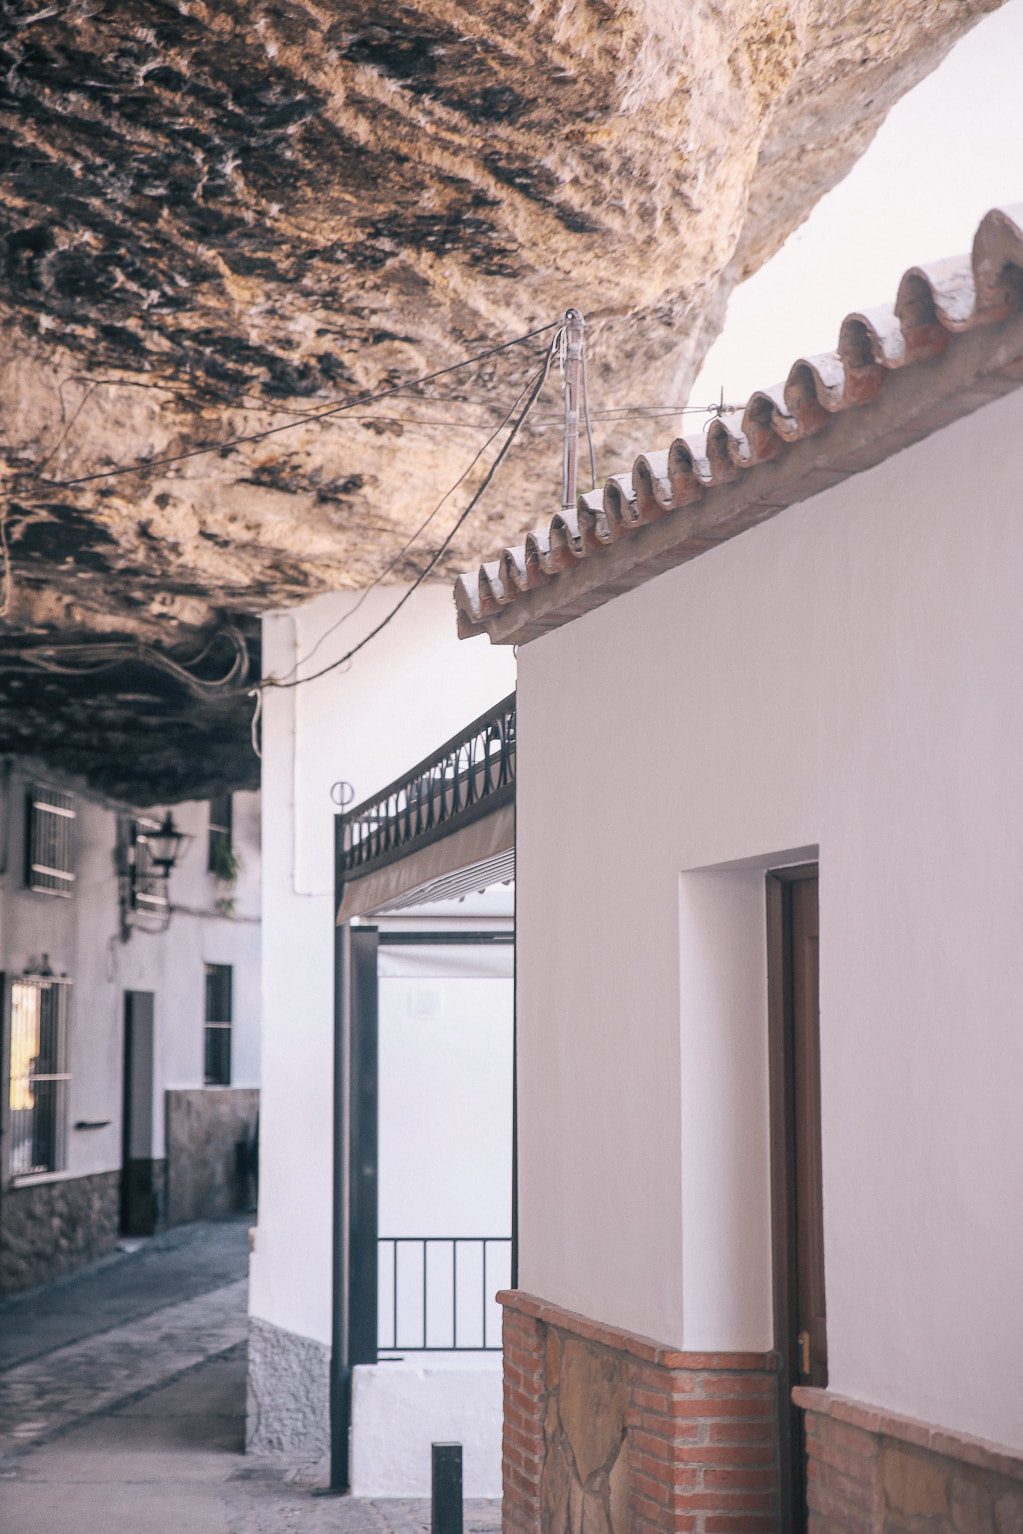 Discovering setinil de las bodegas, Andalusia - Spain by The Belle Blog 